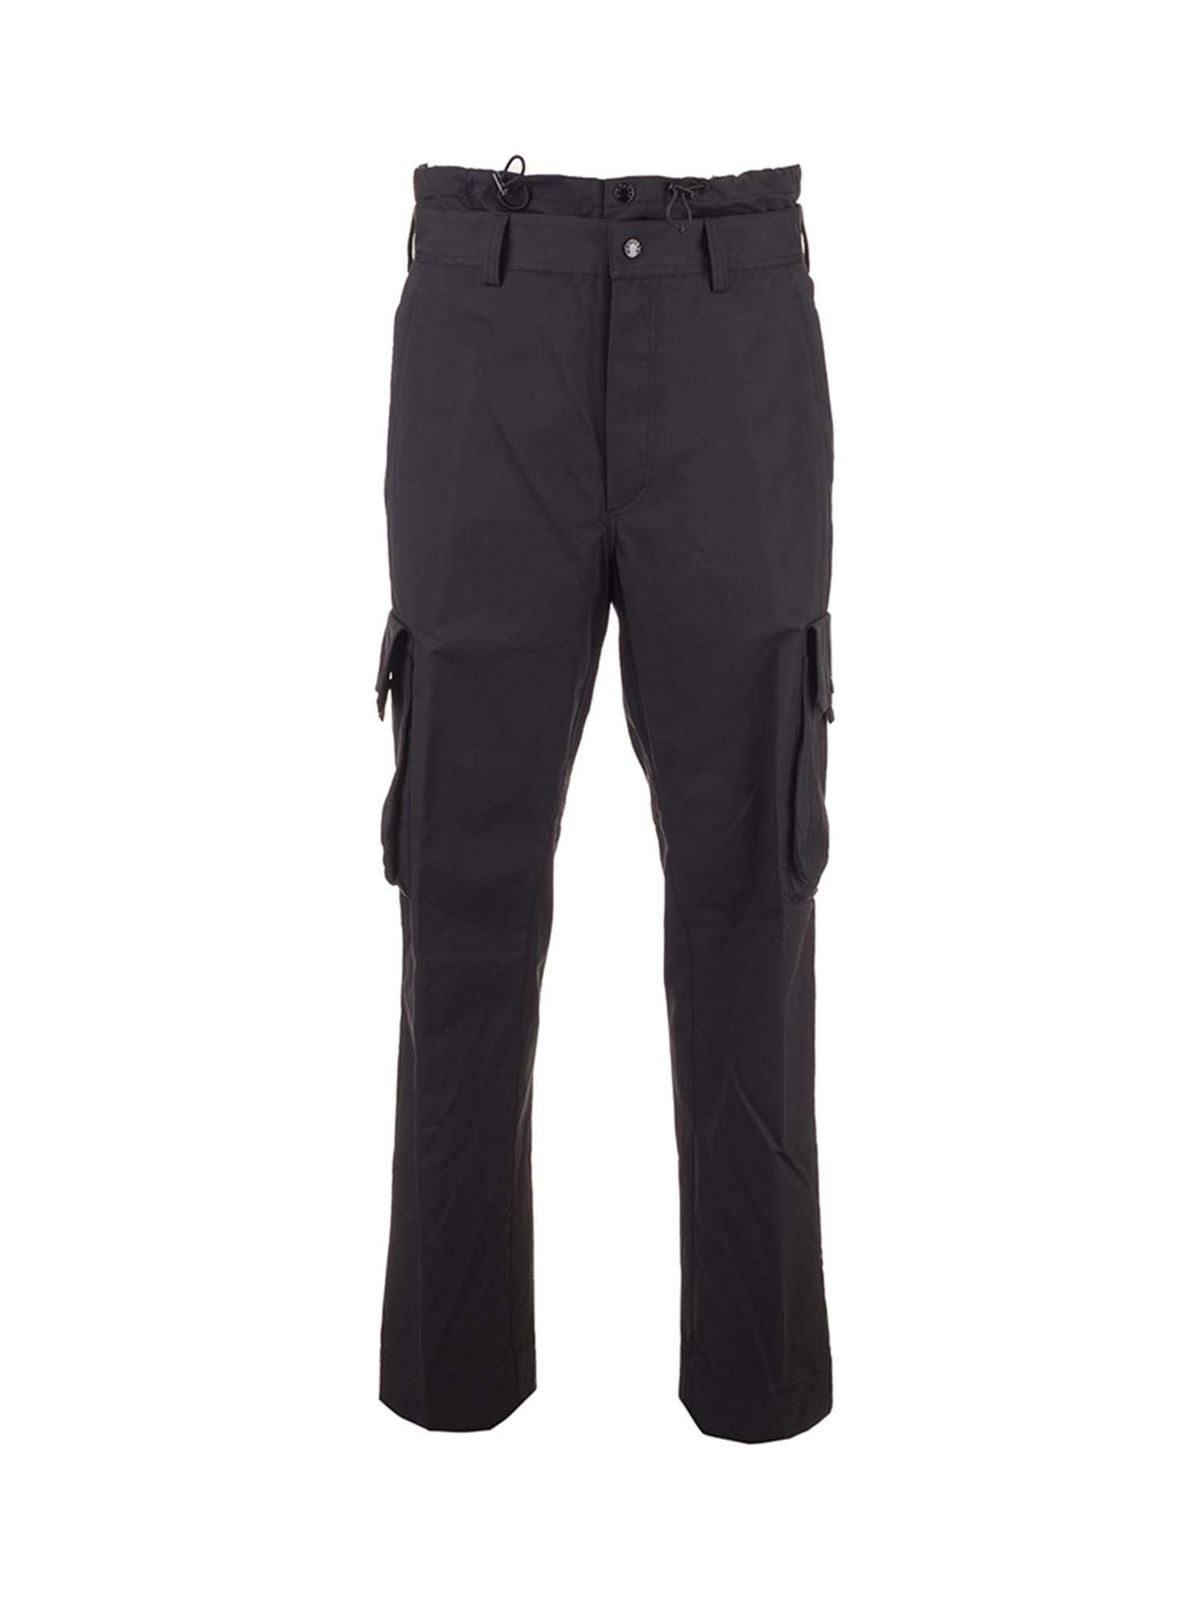 Moncler - J.W. Anderson cargo pants in black - casual trousers ...